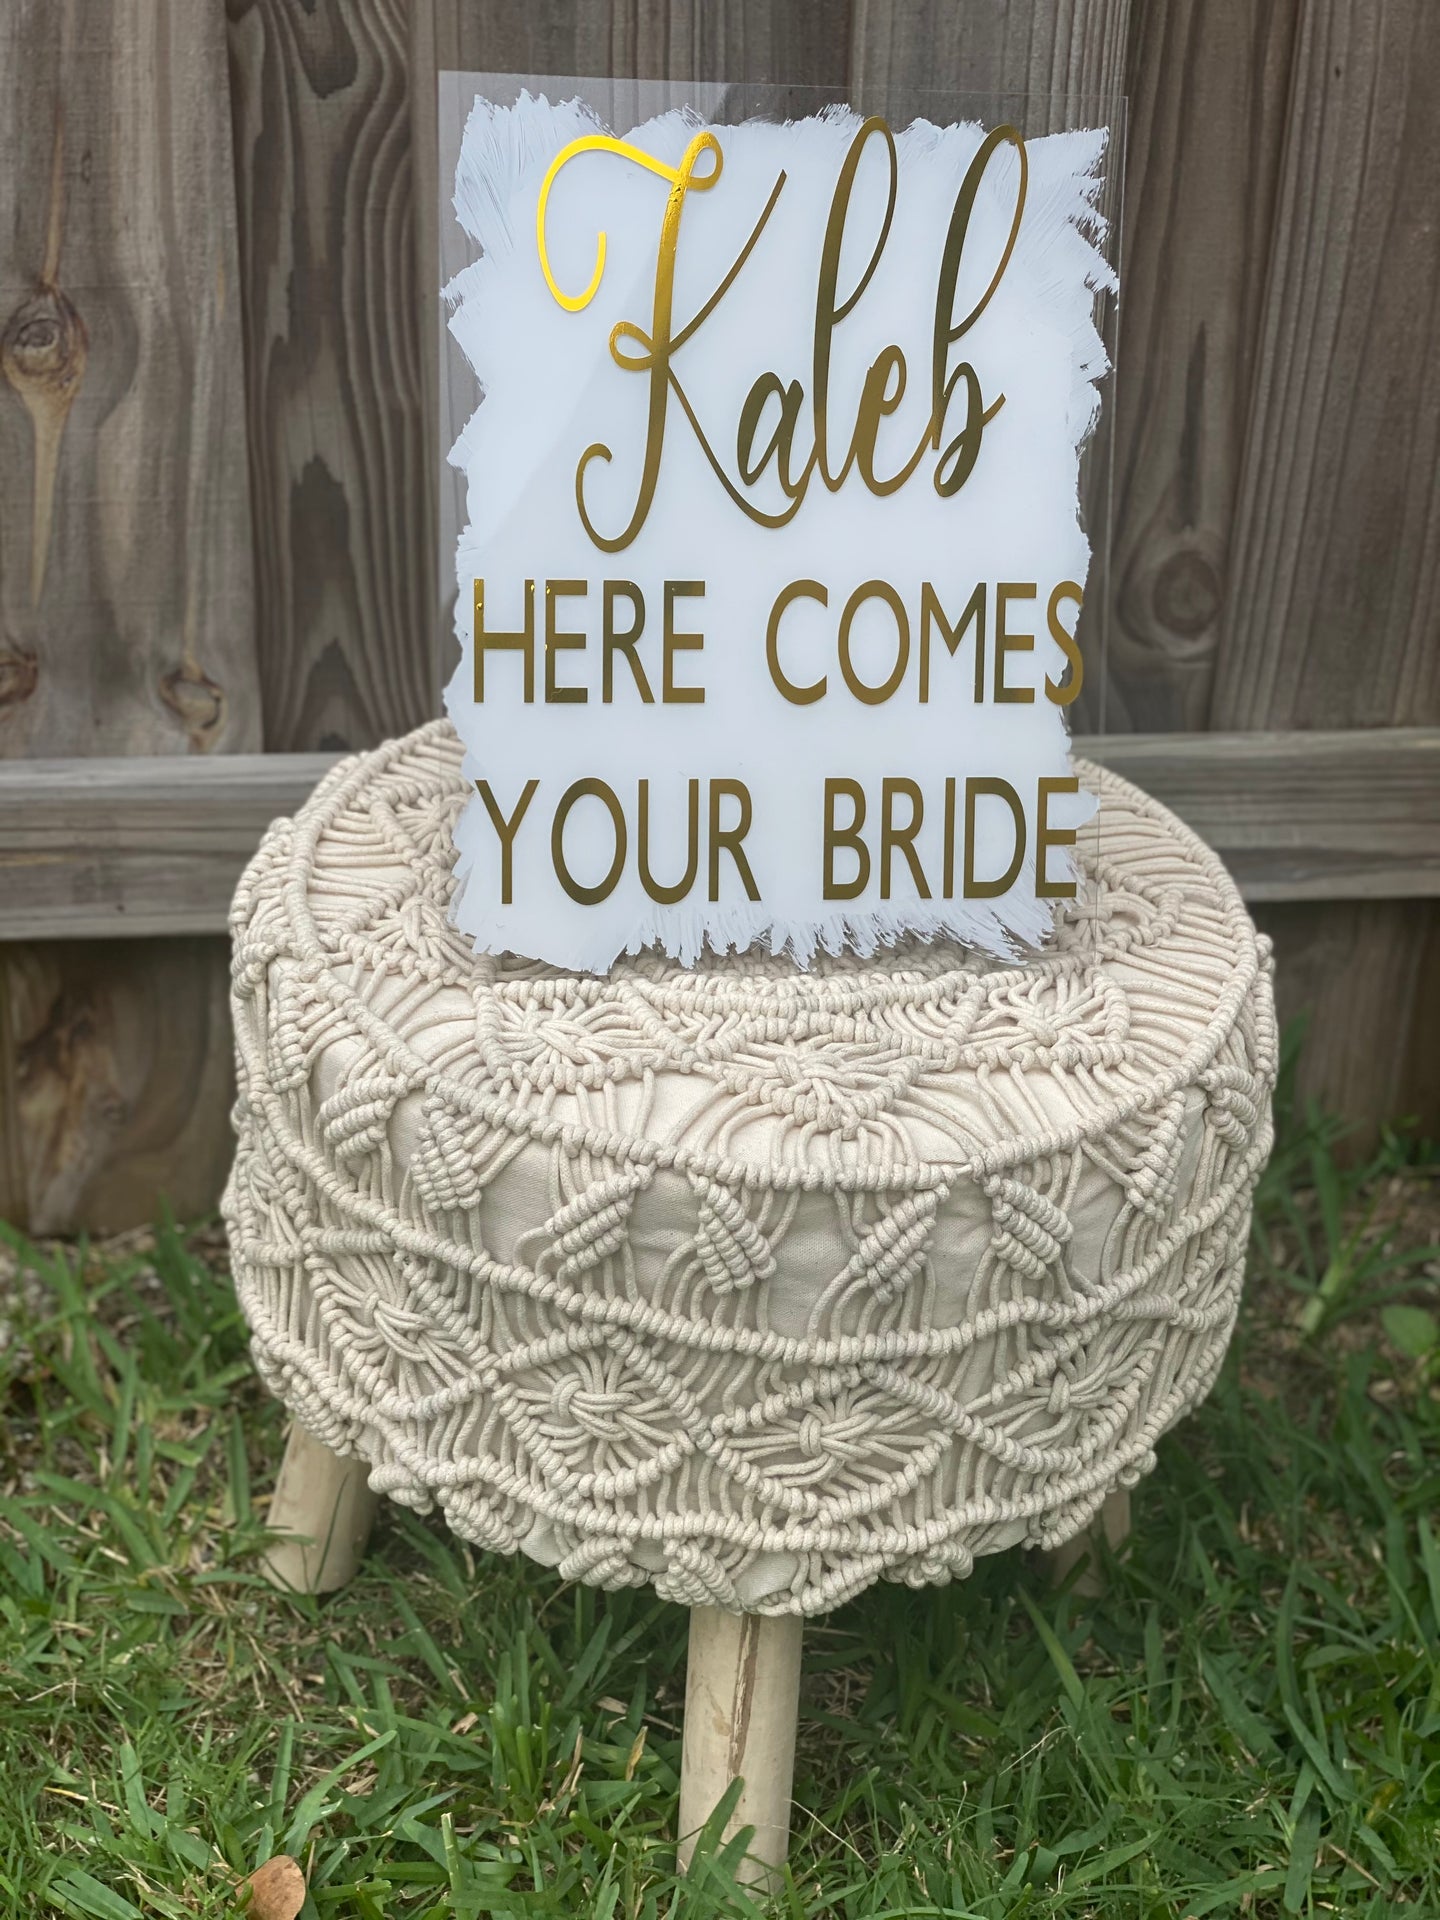 Here comes your bride sign